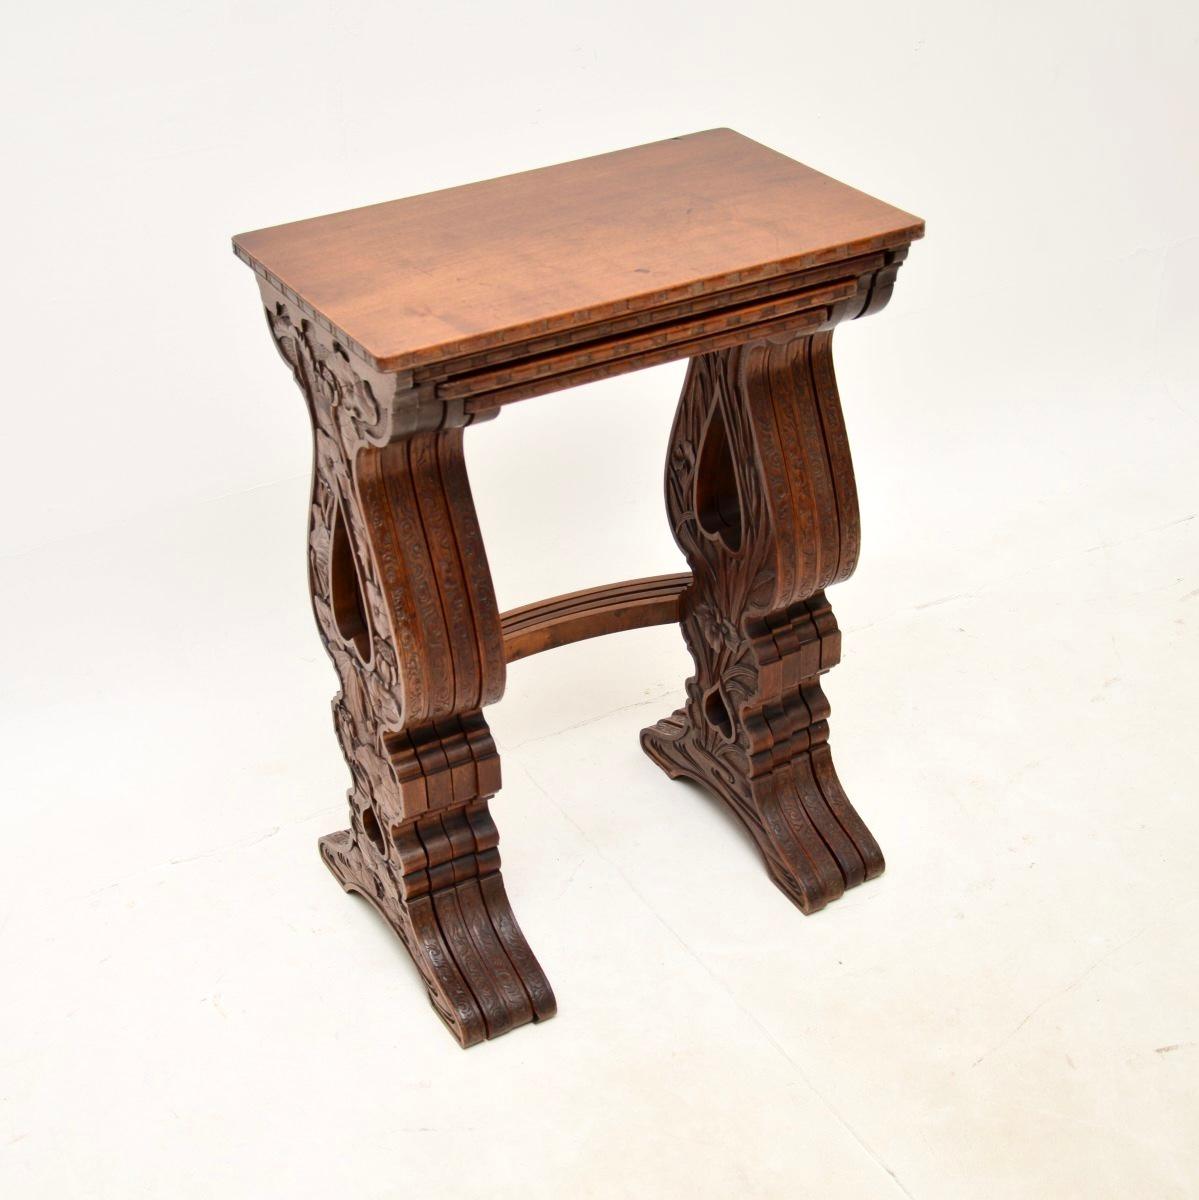 An absolutely stunning antique Art Nouveau carved nest of four tables. They were made in England, they date from around the 1890-1900 period.

The quality is outstanding, each of the four tables has unique botanical themed carving on the outer and